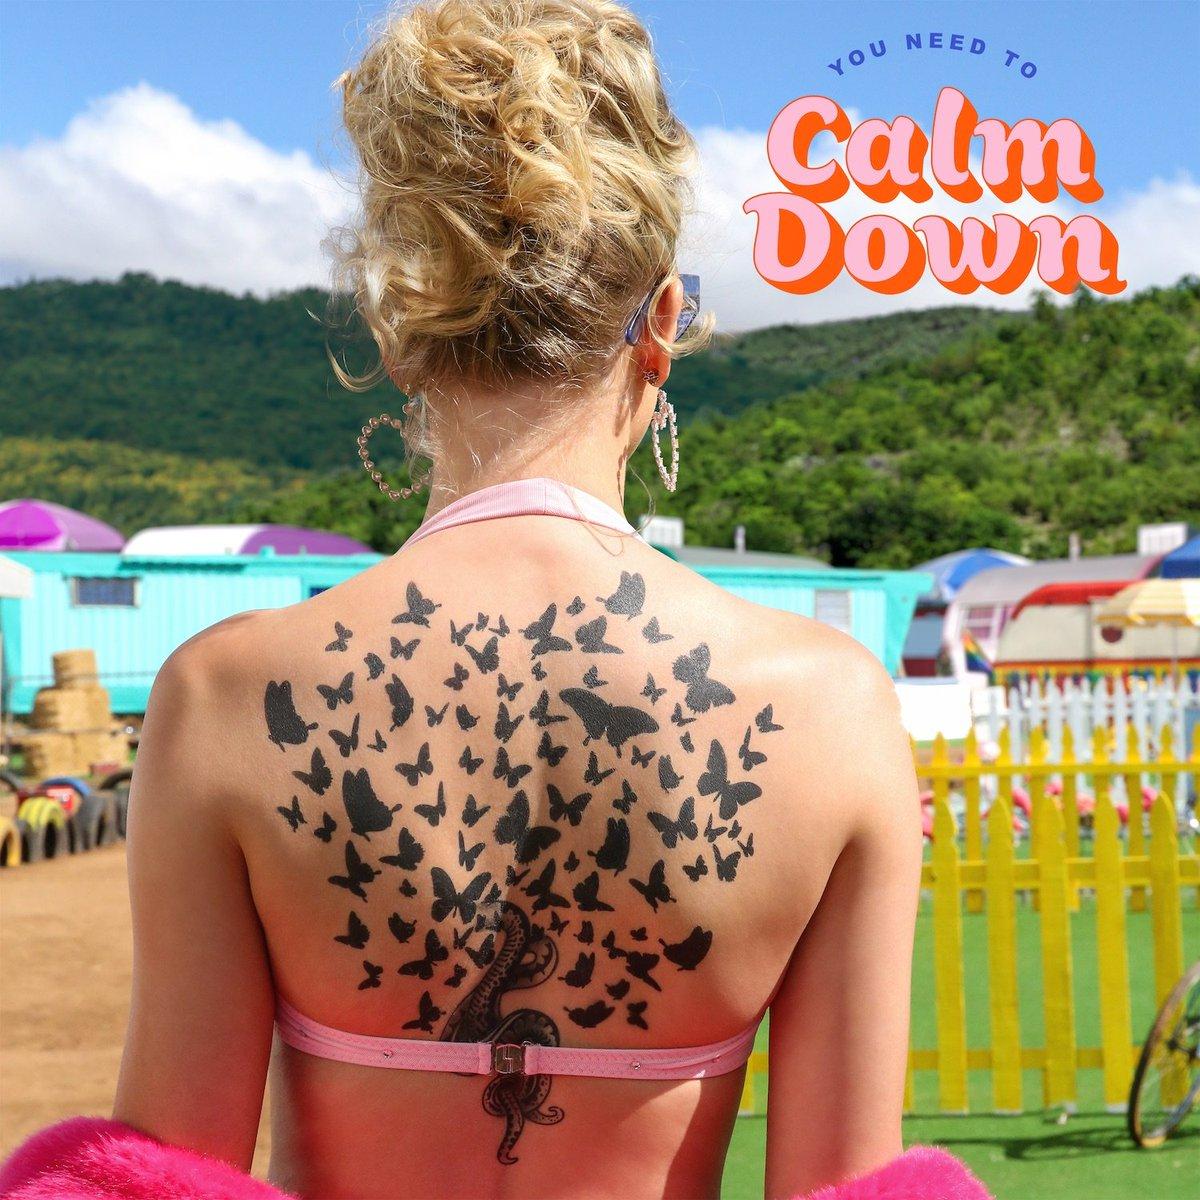 Taylor Swift You Need To Calm Down wallpaper